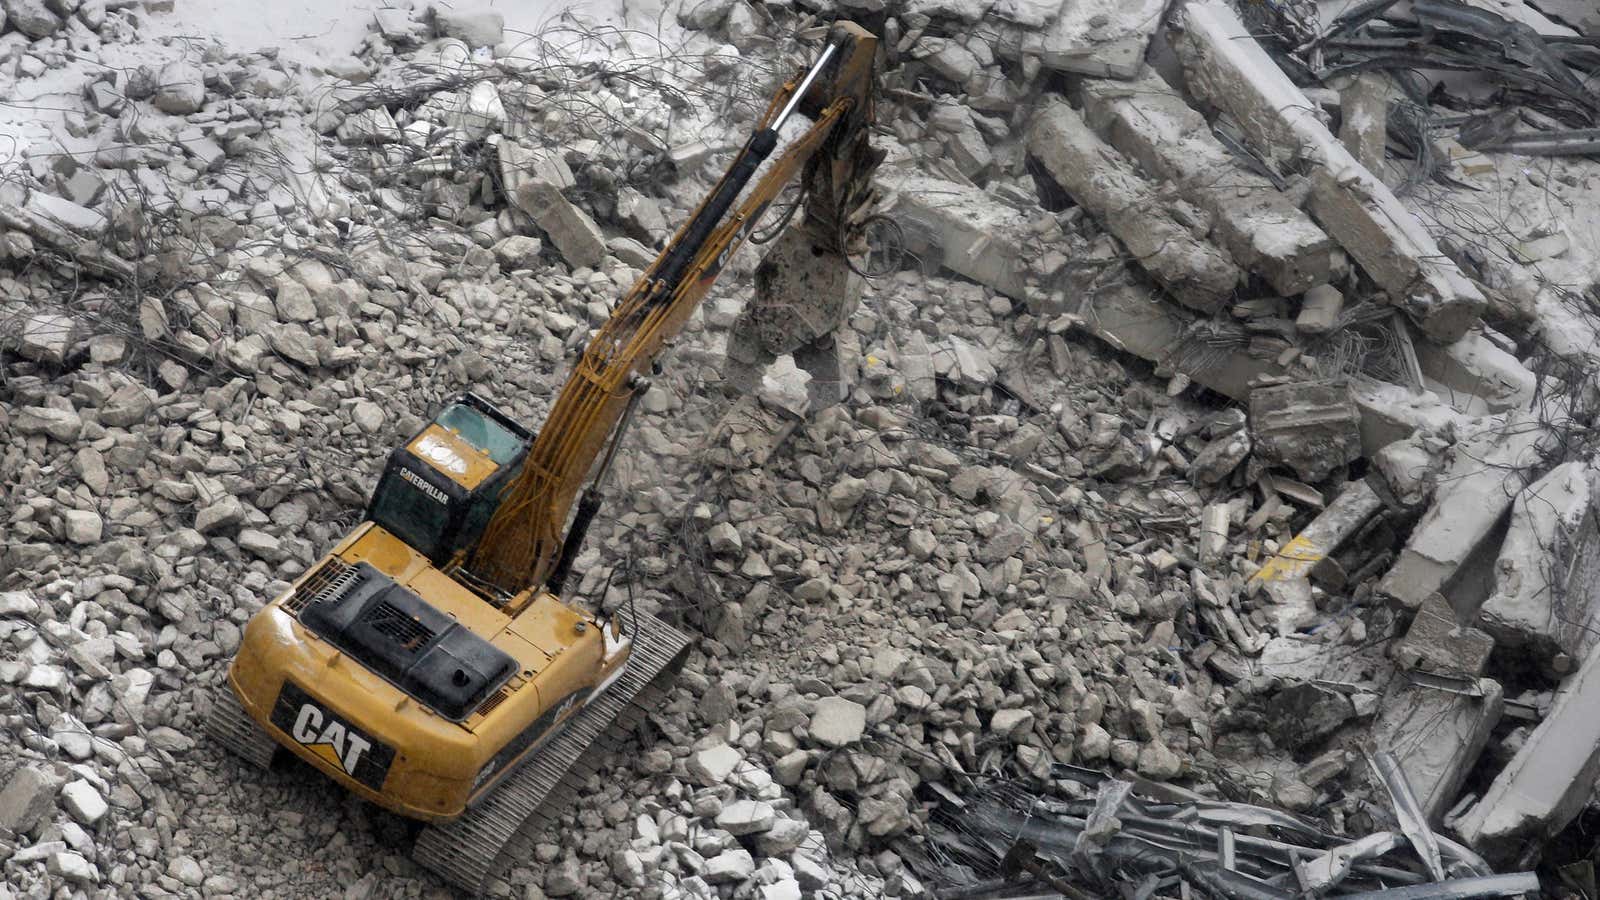 Caterpillar needs to do some digging in the rubble of its Siwei acquisition.